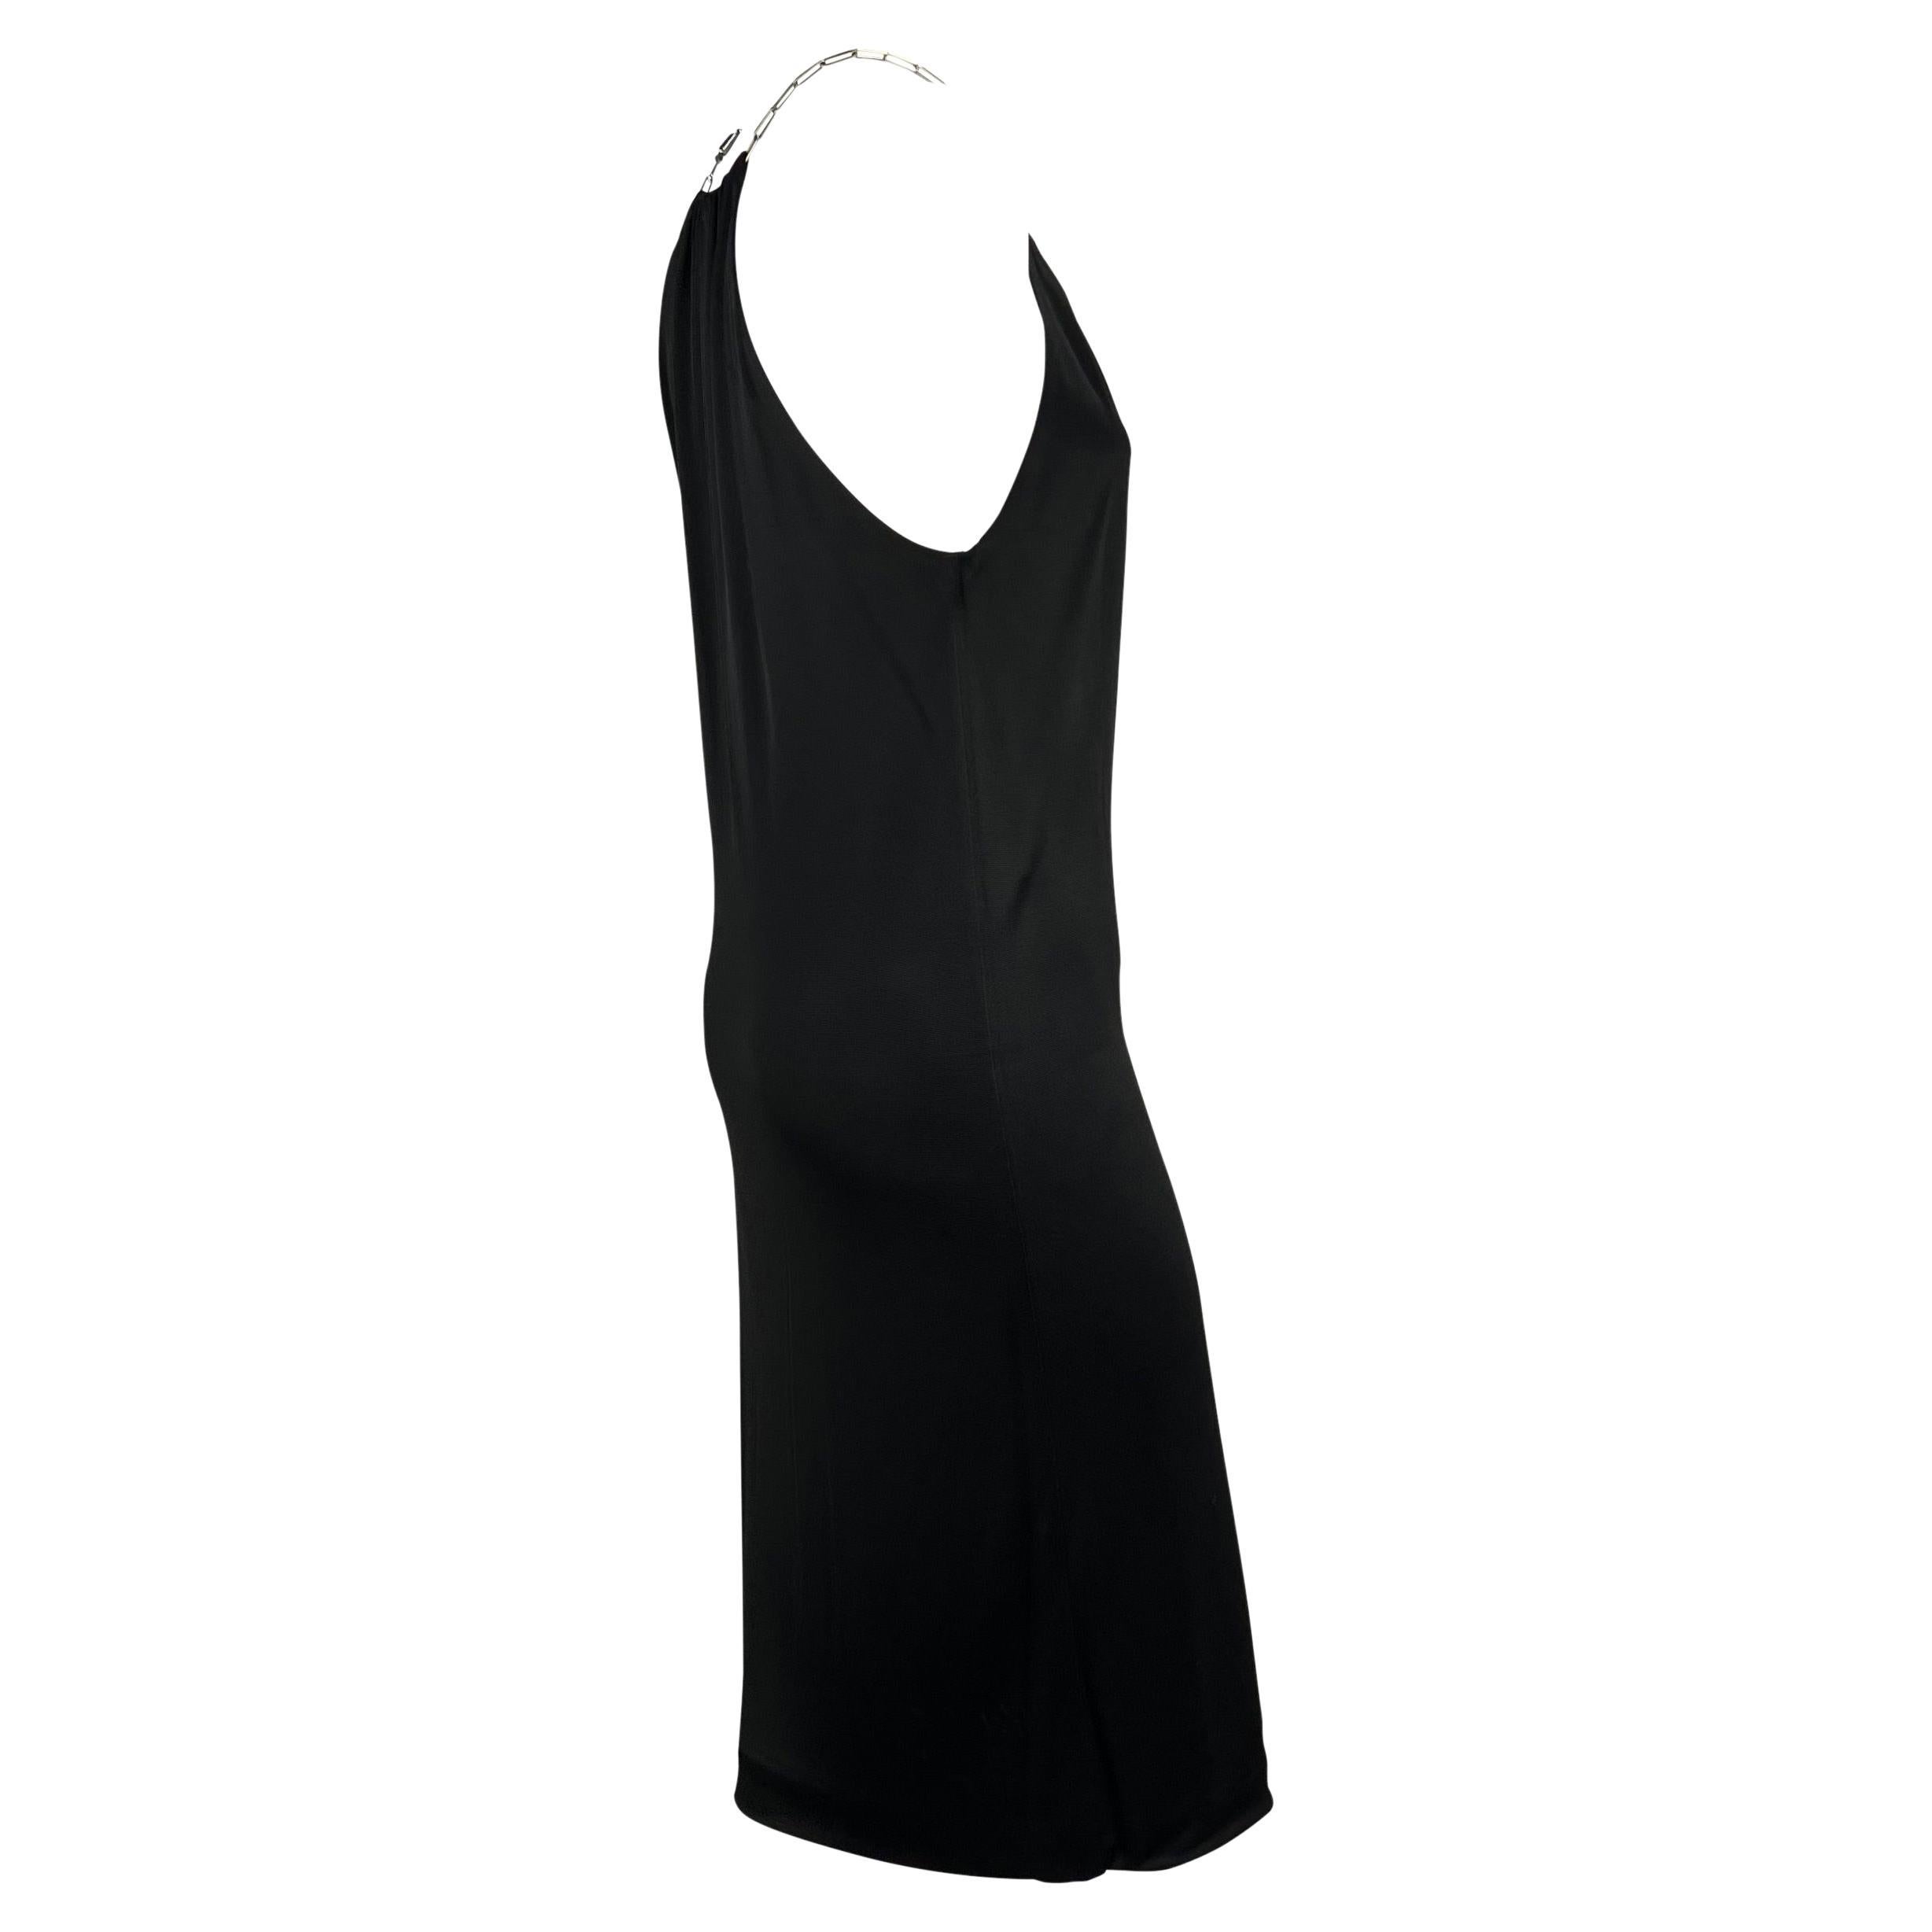 S/S 2000 Gucci by Tom Ford Black Viscose Chain Plunge Sleeveless Dress For Sale 1